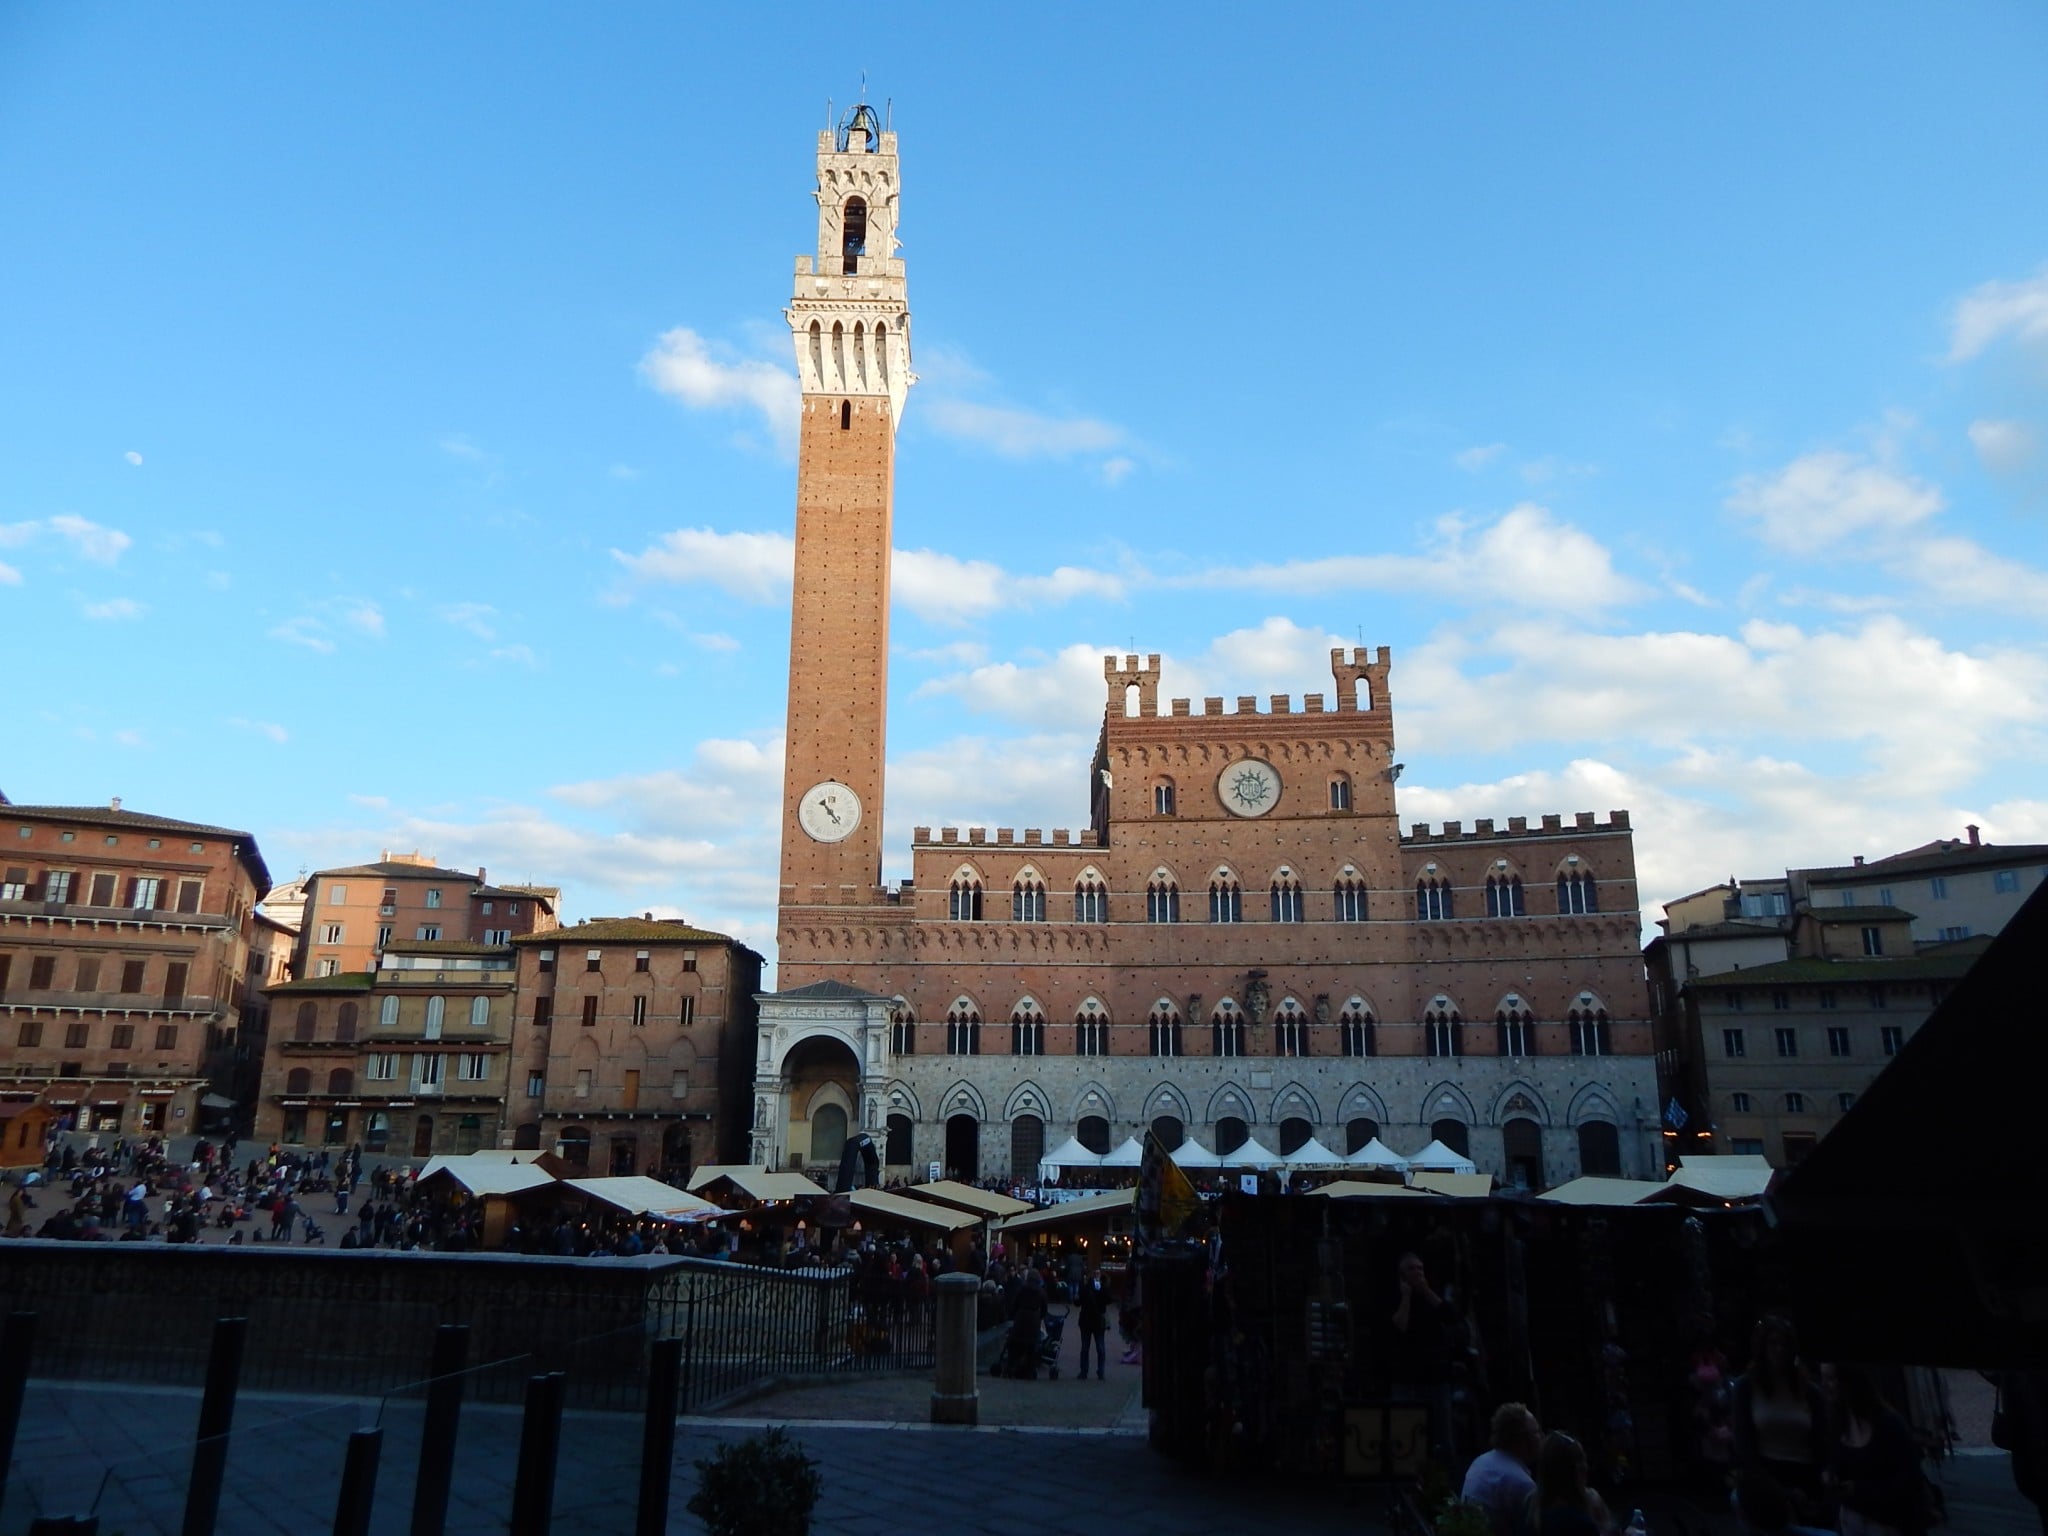 Bell tower in Piazza del Campo, Siena